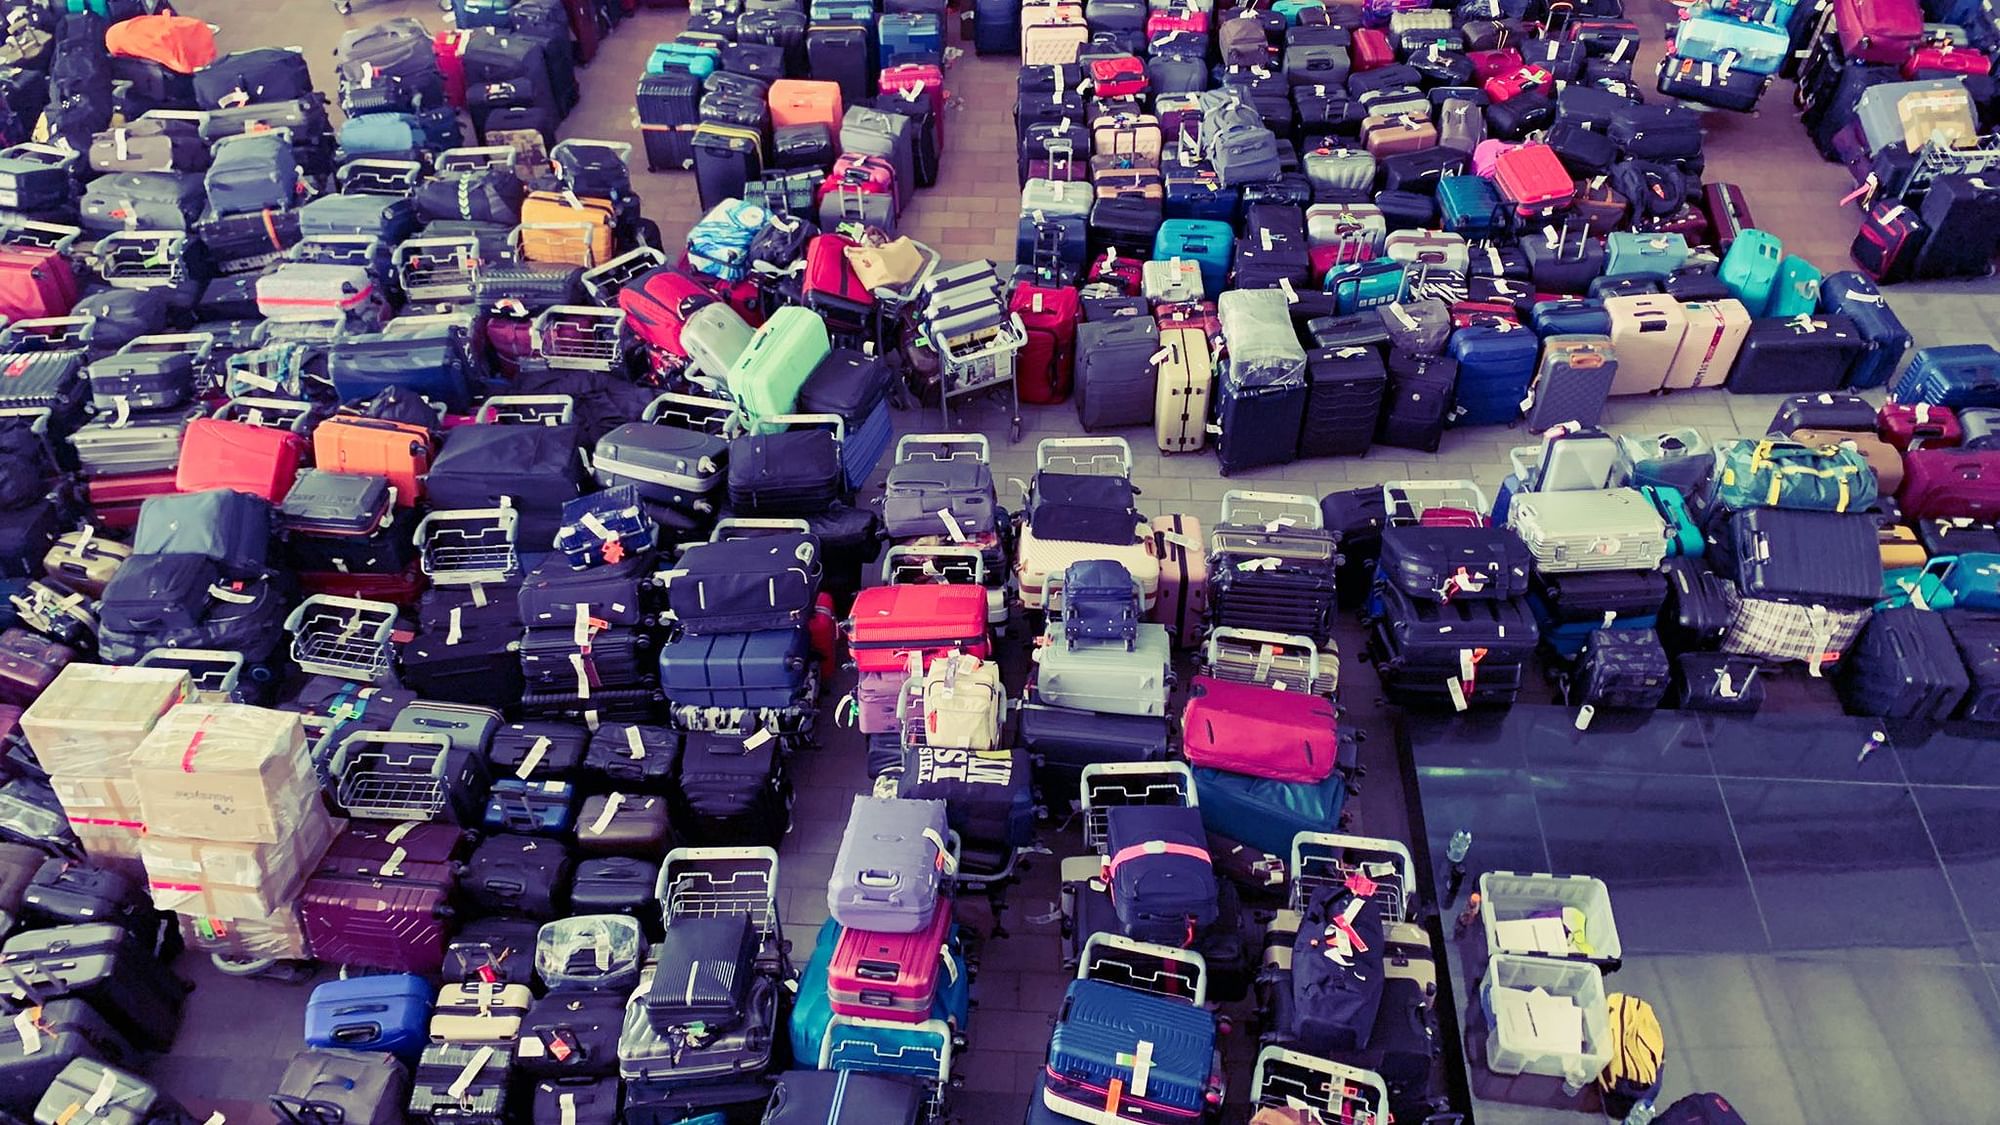 <div class="paragraphs"><p>Stunning images of baggage handling issues emerged from London's Heathrow airport, with airlines on Monday being consequently asked to cancel 10 percent of their flights from Terminals 2 and 3.</p></div>